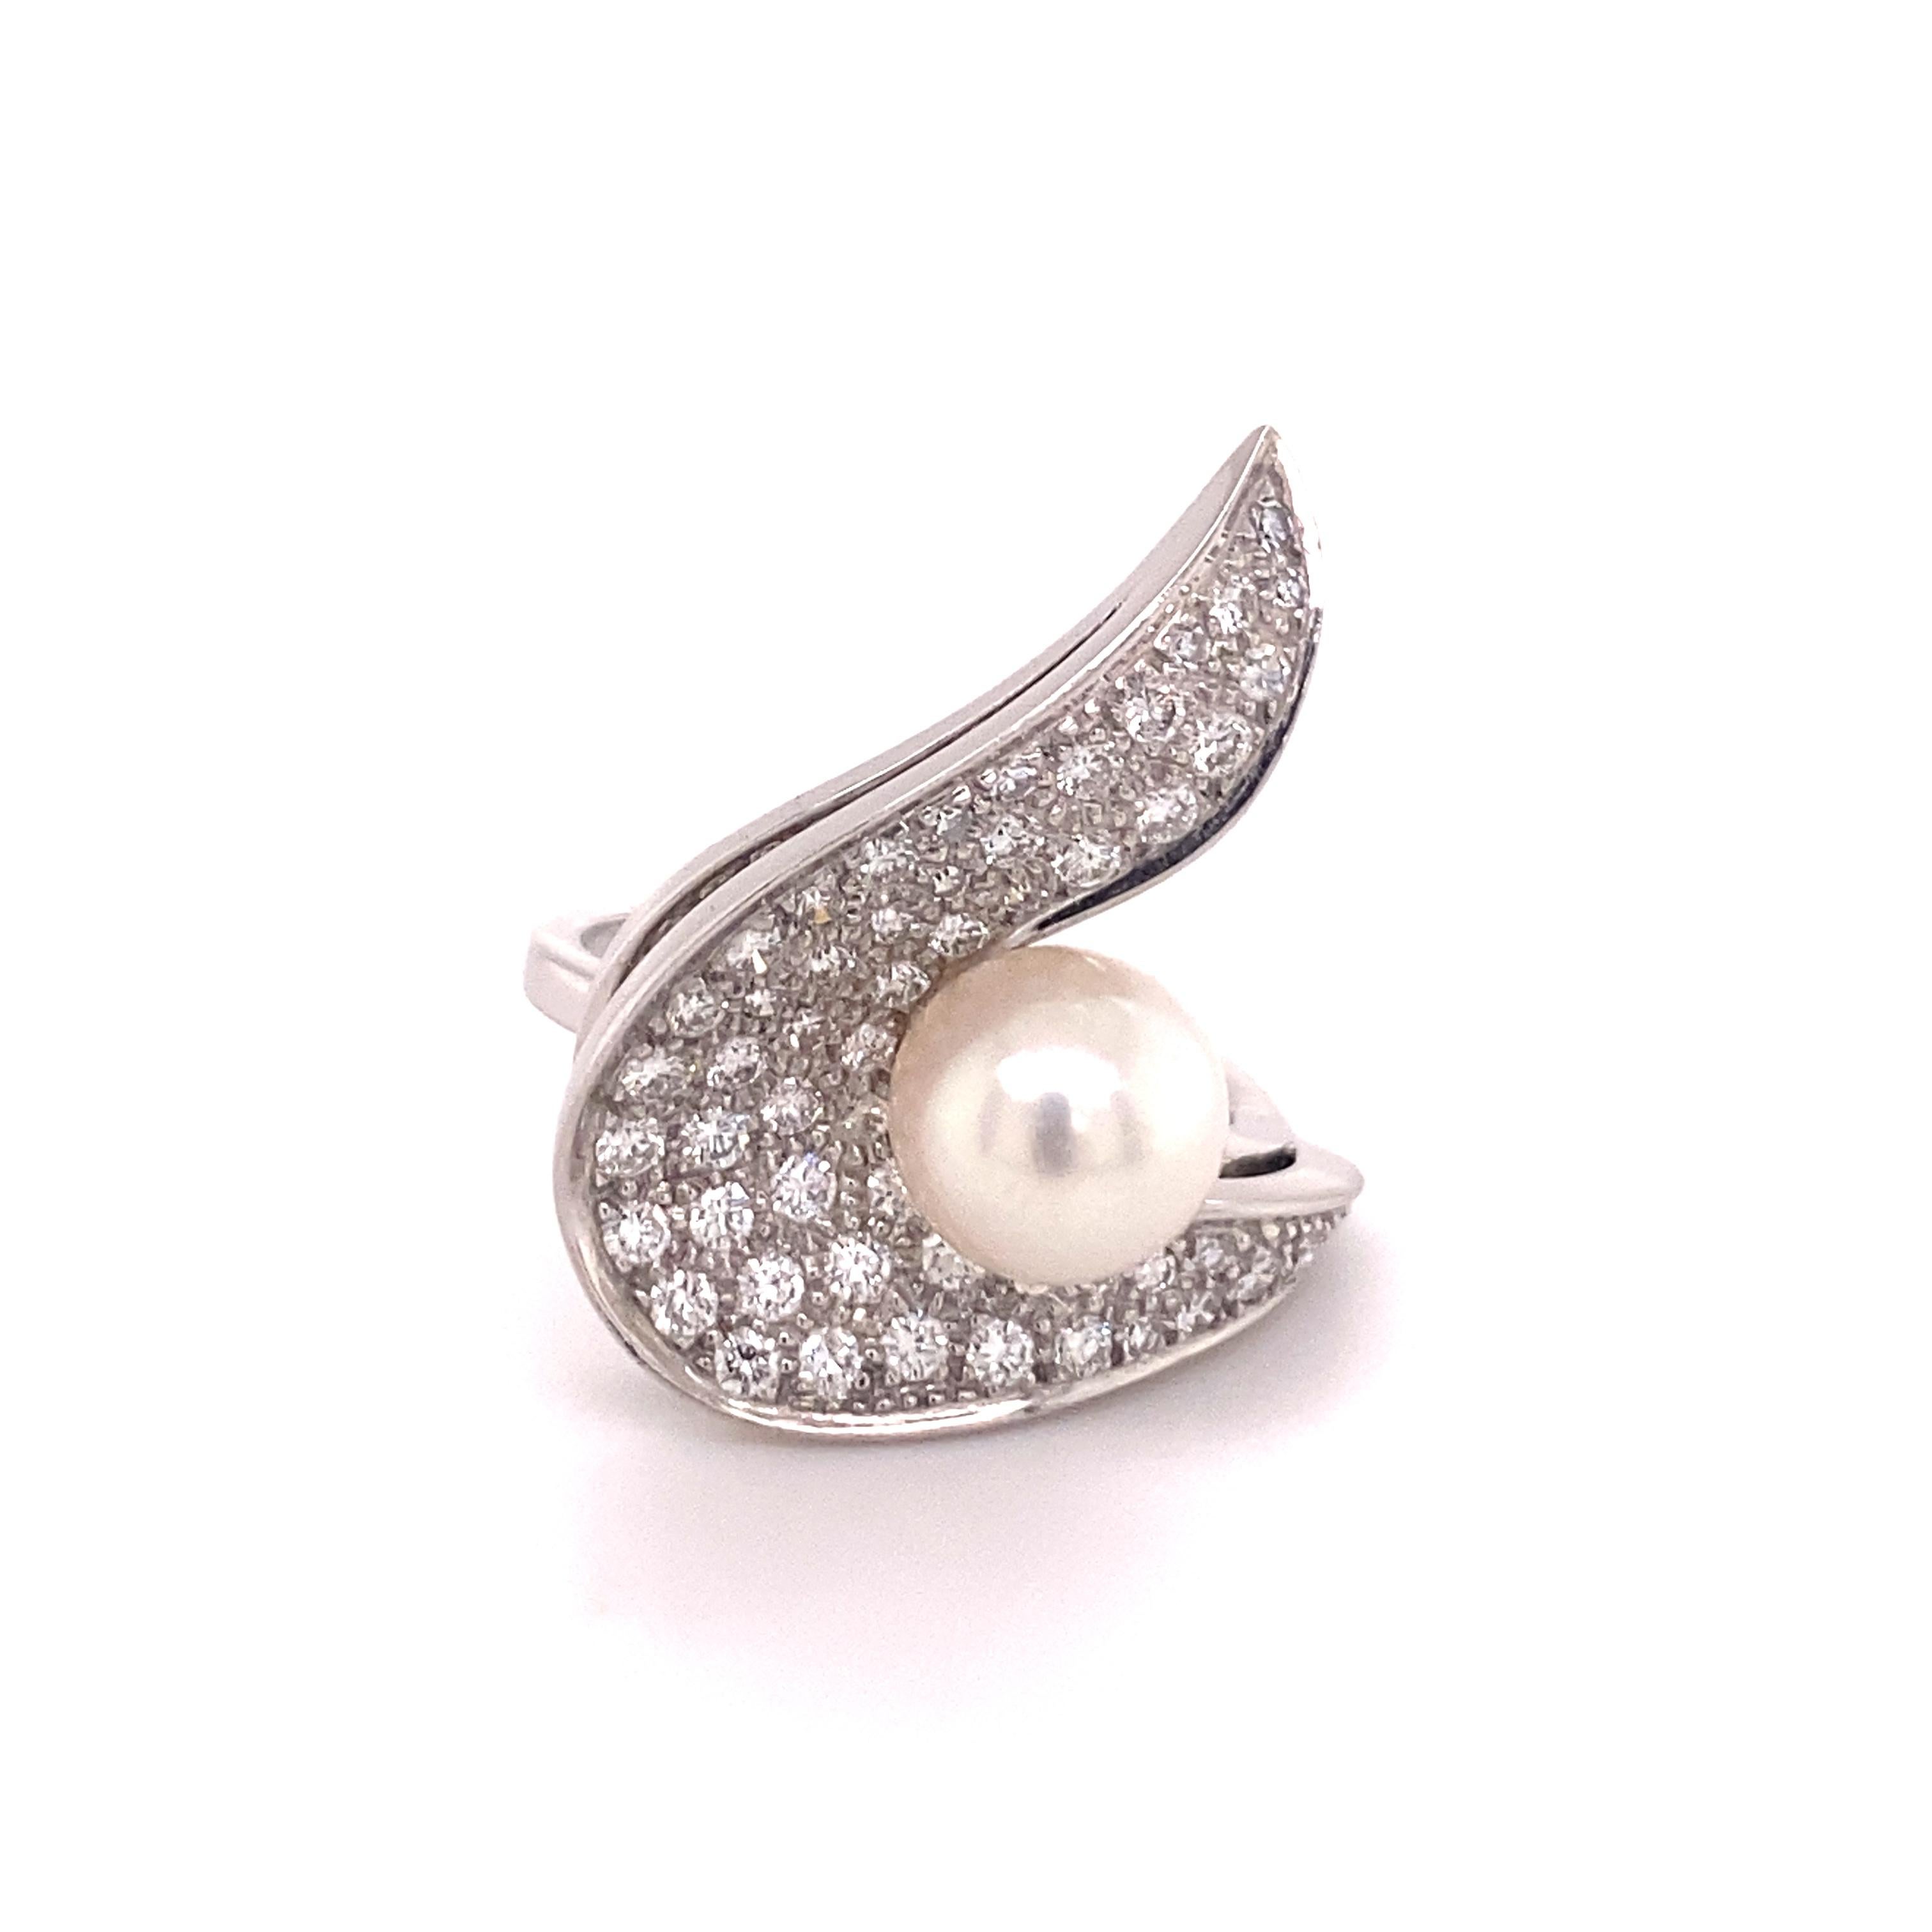 Modern akoya cultured pearl and diamond ring with a twist! Handmade manufactured in 18 karat white gold. 

Elegantly curved design with concave and convex elements; pavé-set with 55 brilliant-cut diamonds totalling 1.18 ct of weight. Set with one